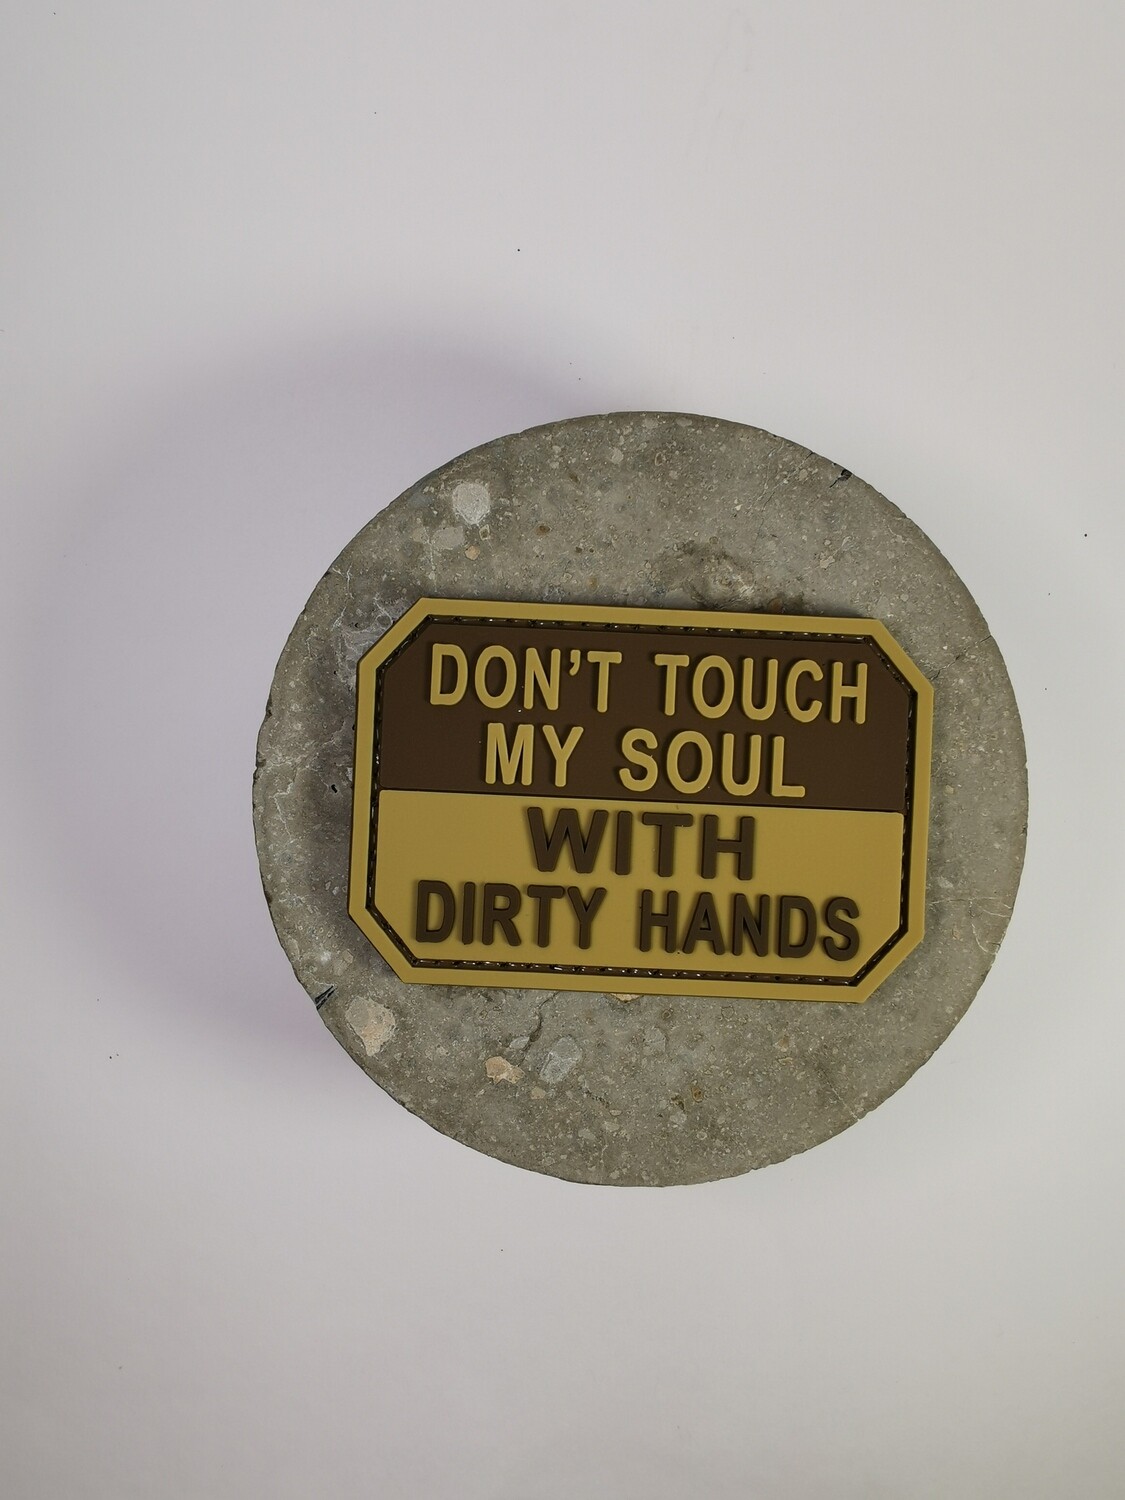 Don't touch my soul